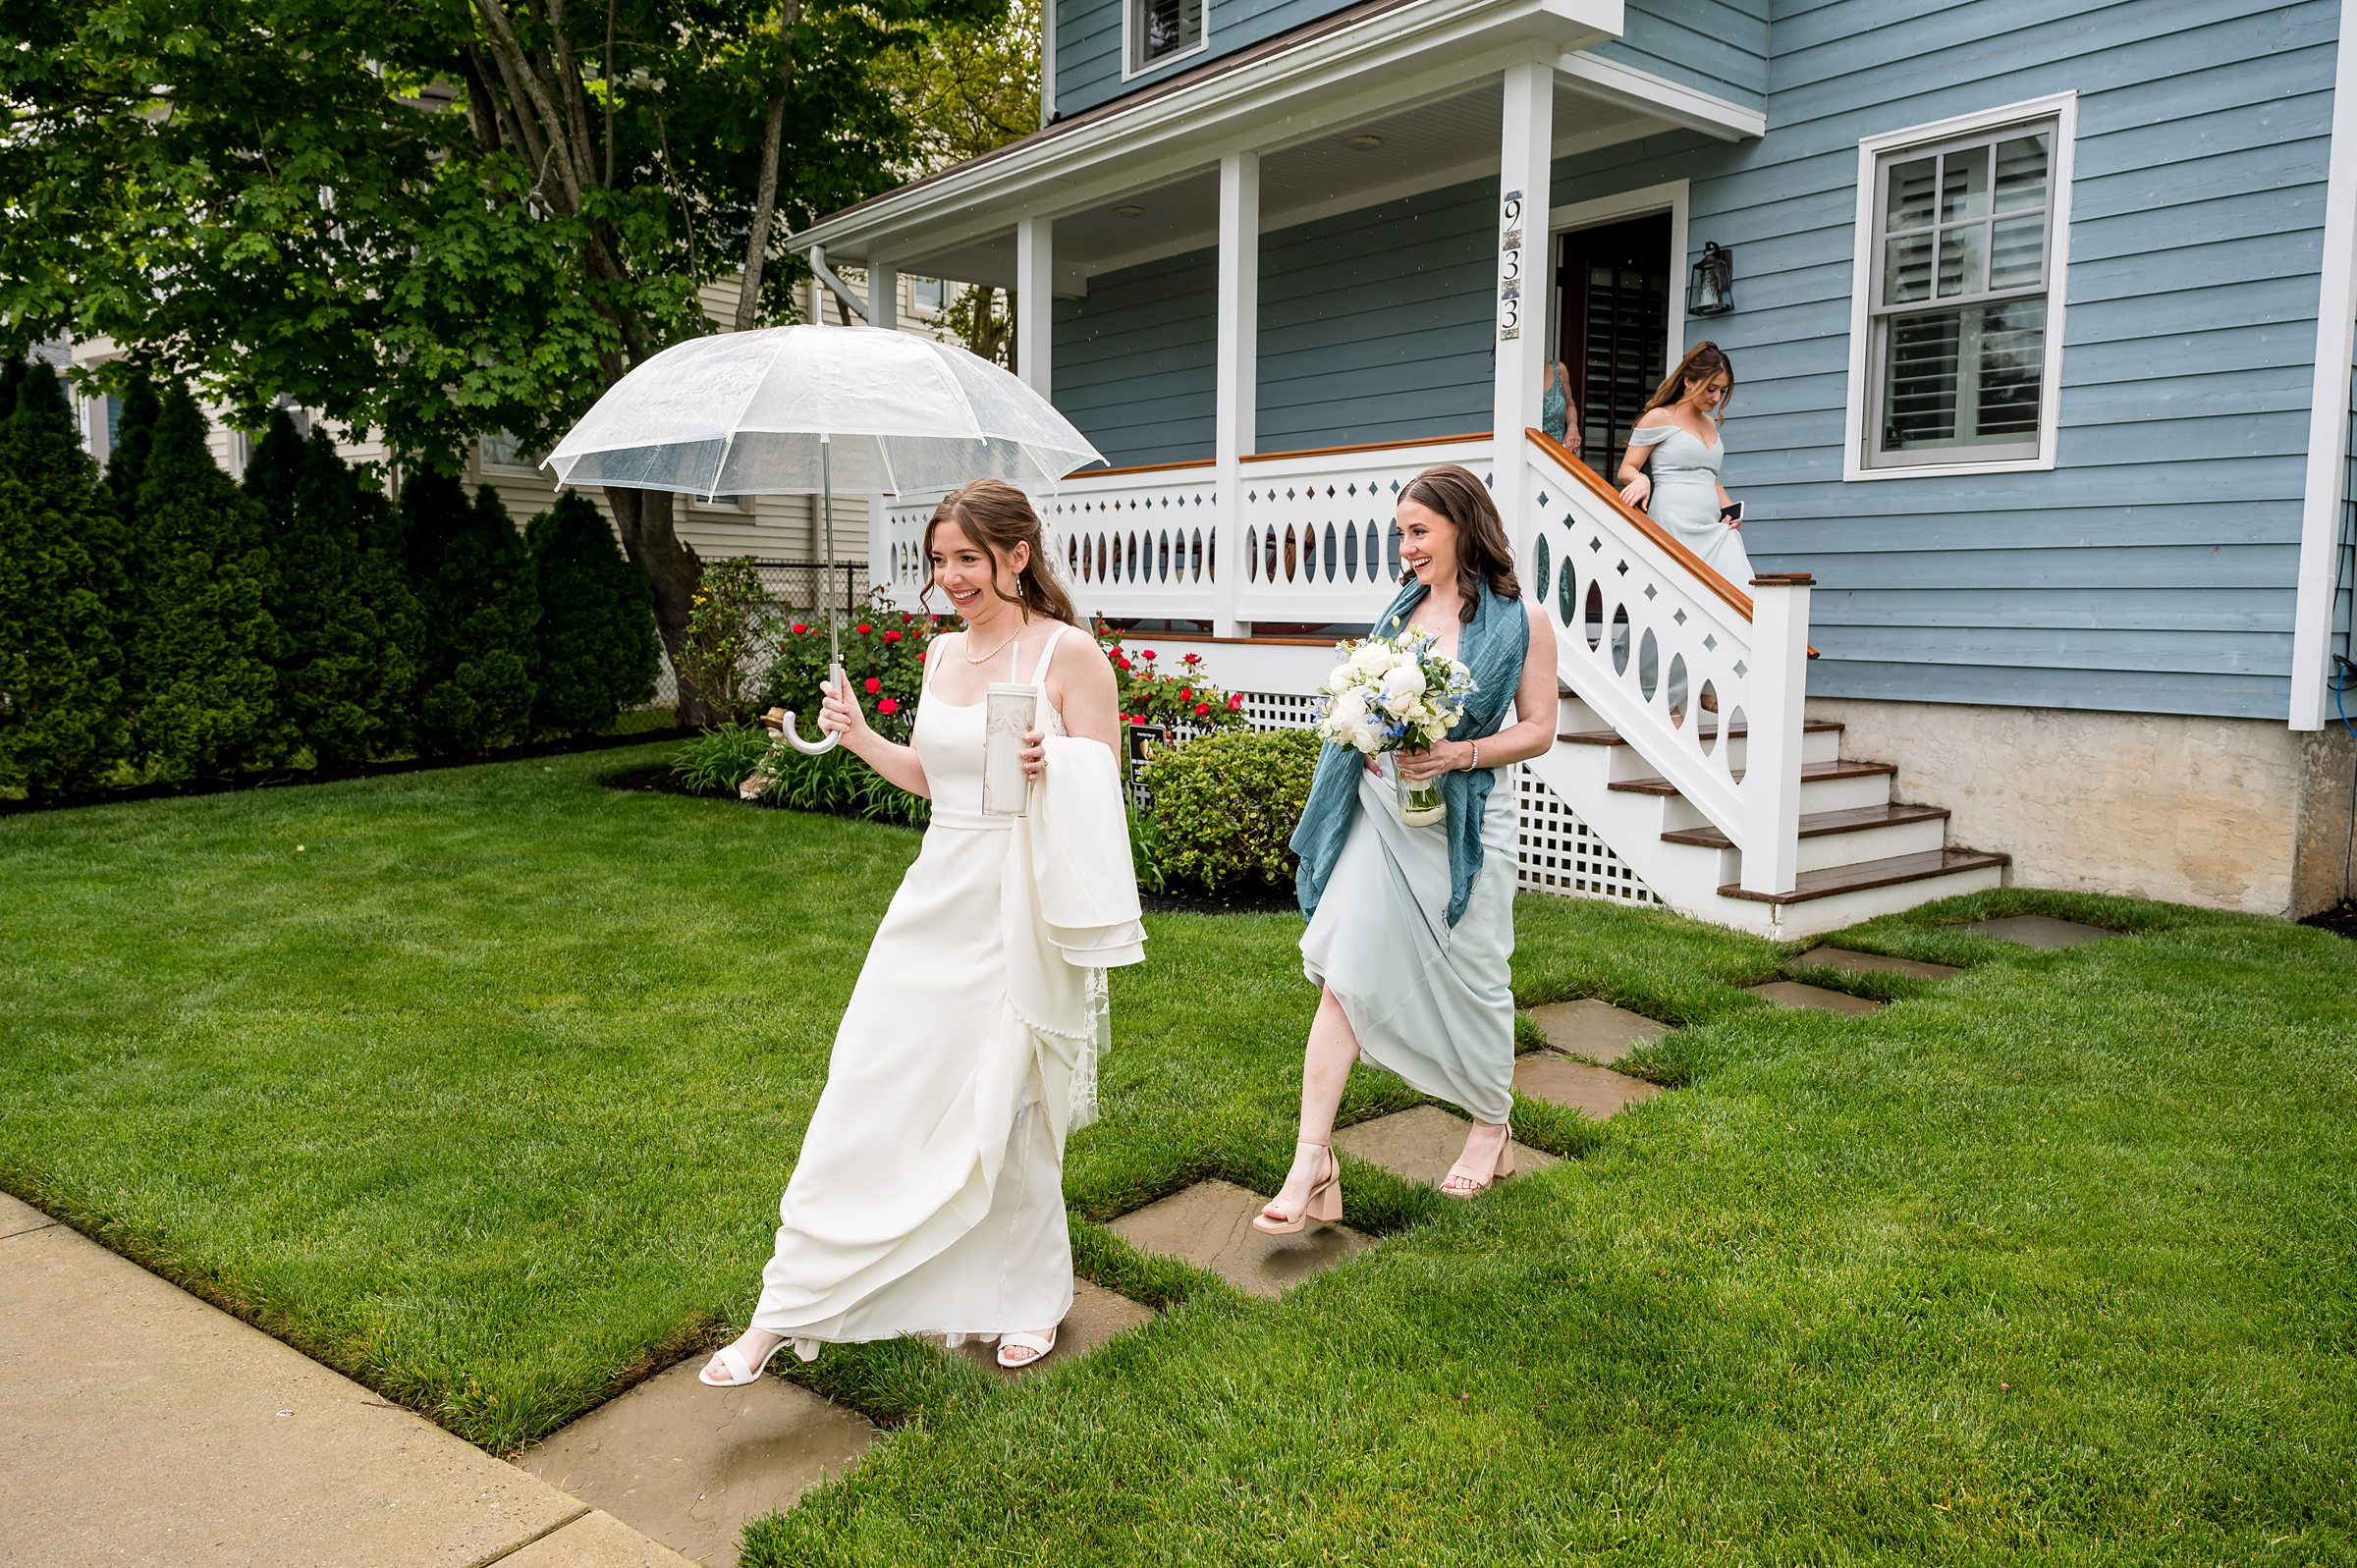 A bride holding an umbrella walks on a pathway beside a bridesmaid holding a bouquet, with another bridesmaid following down the stairs in front of a blue house.